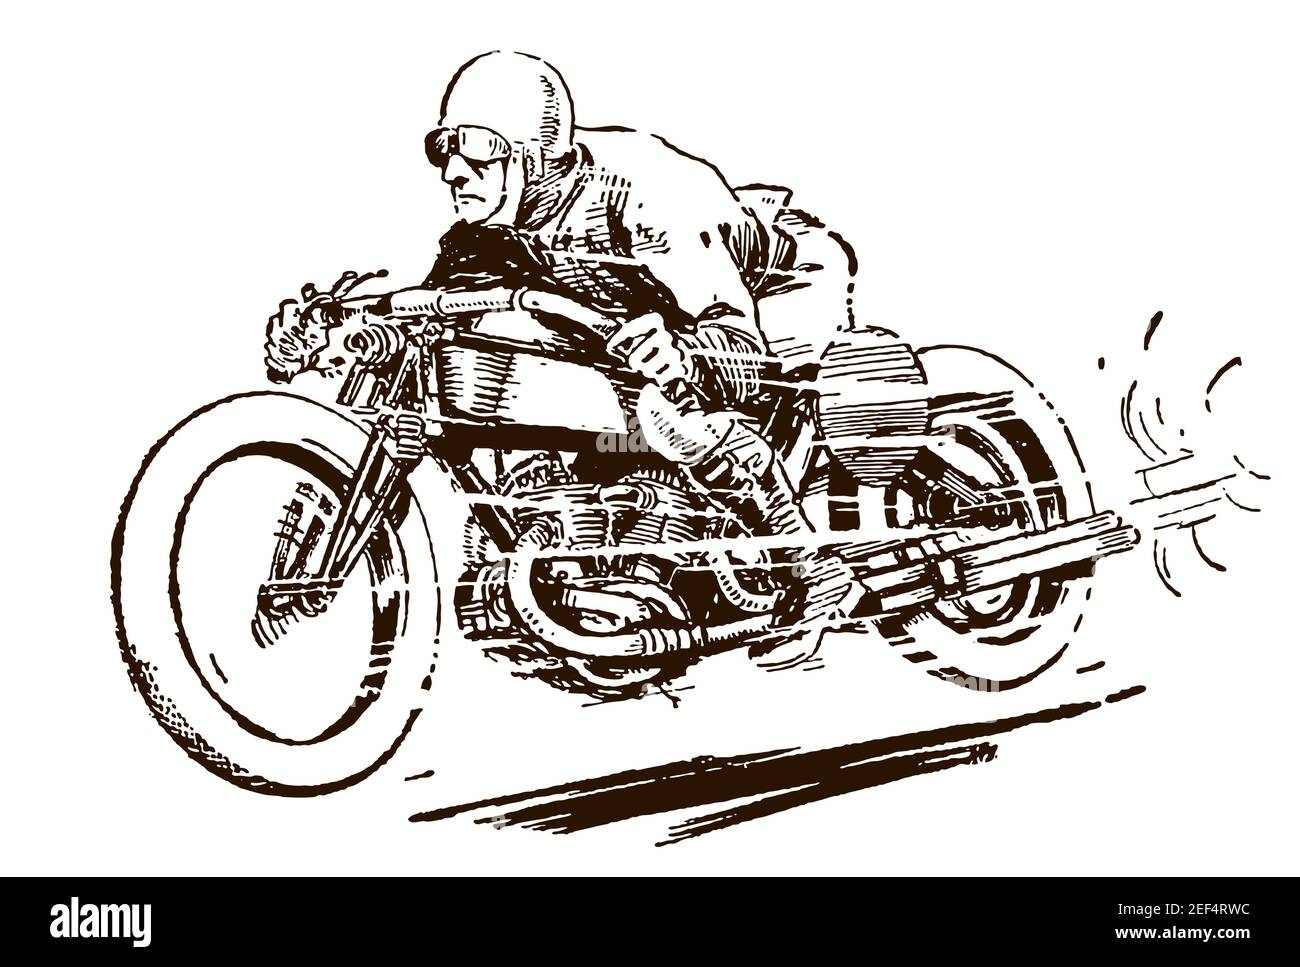 Man from the early 20th century riding an antique racing motorcycle at high speed Stock Vector